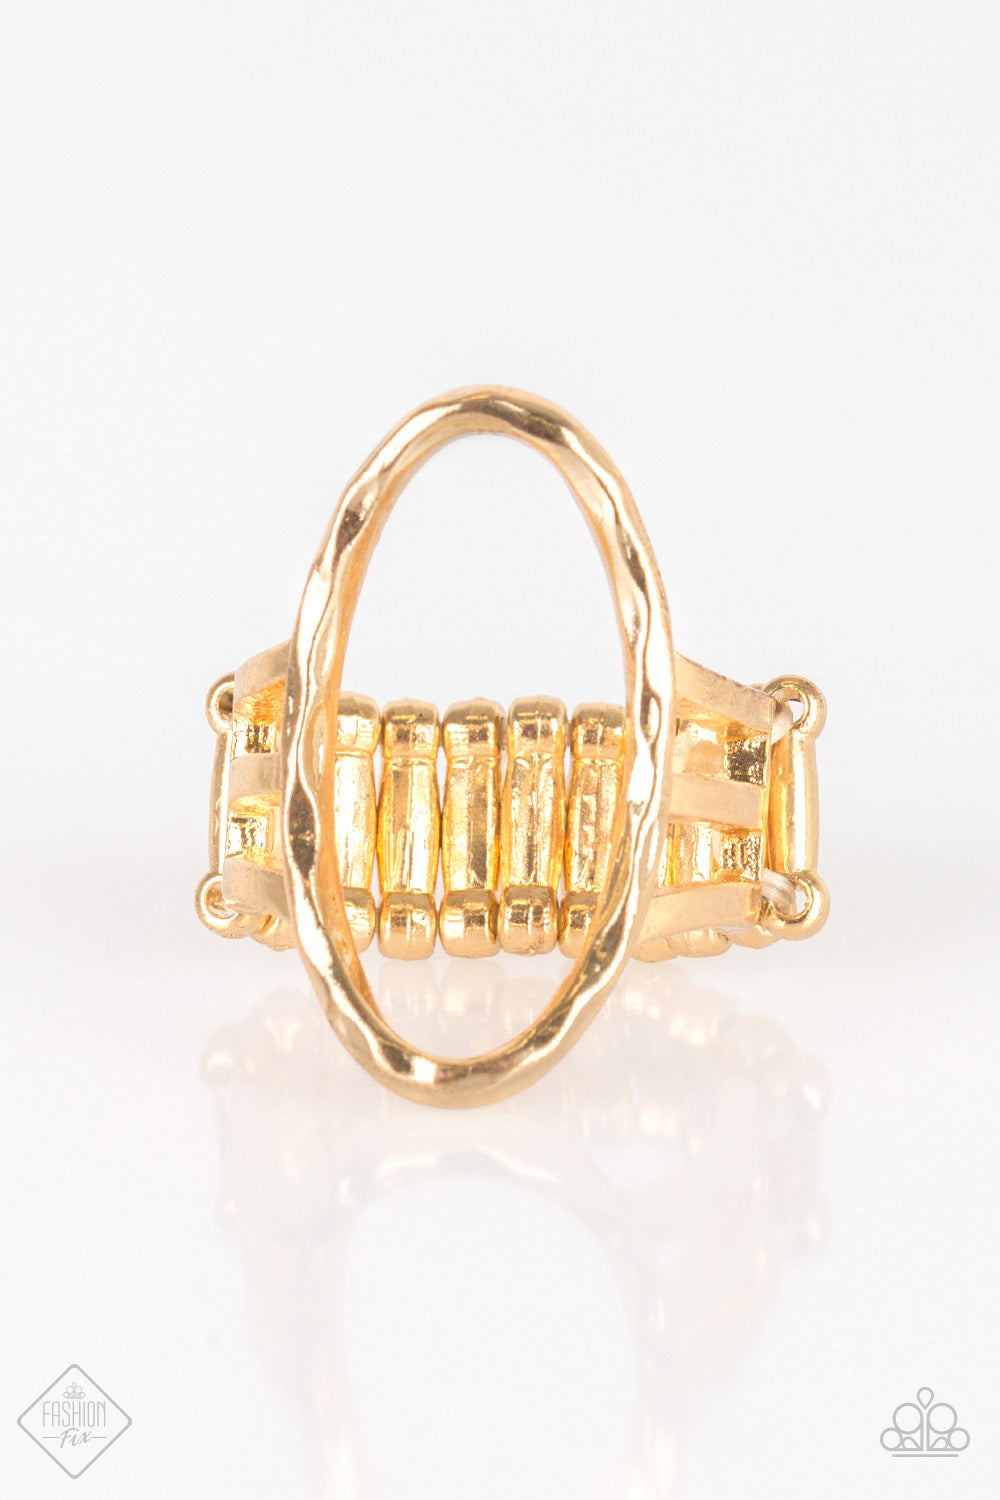 Center Chic - gold ring